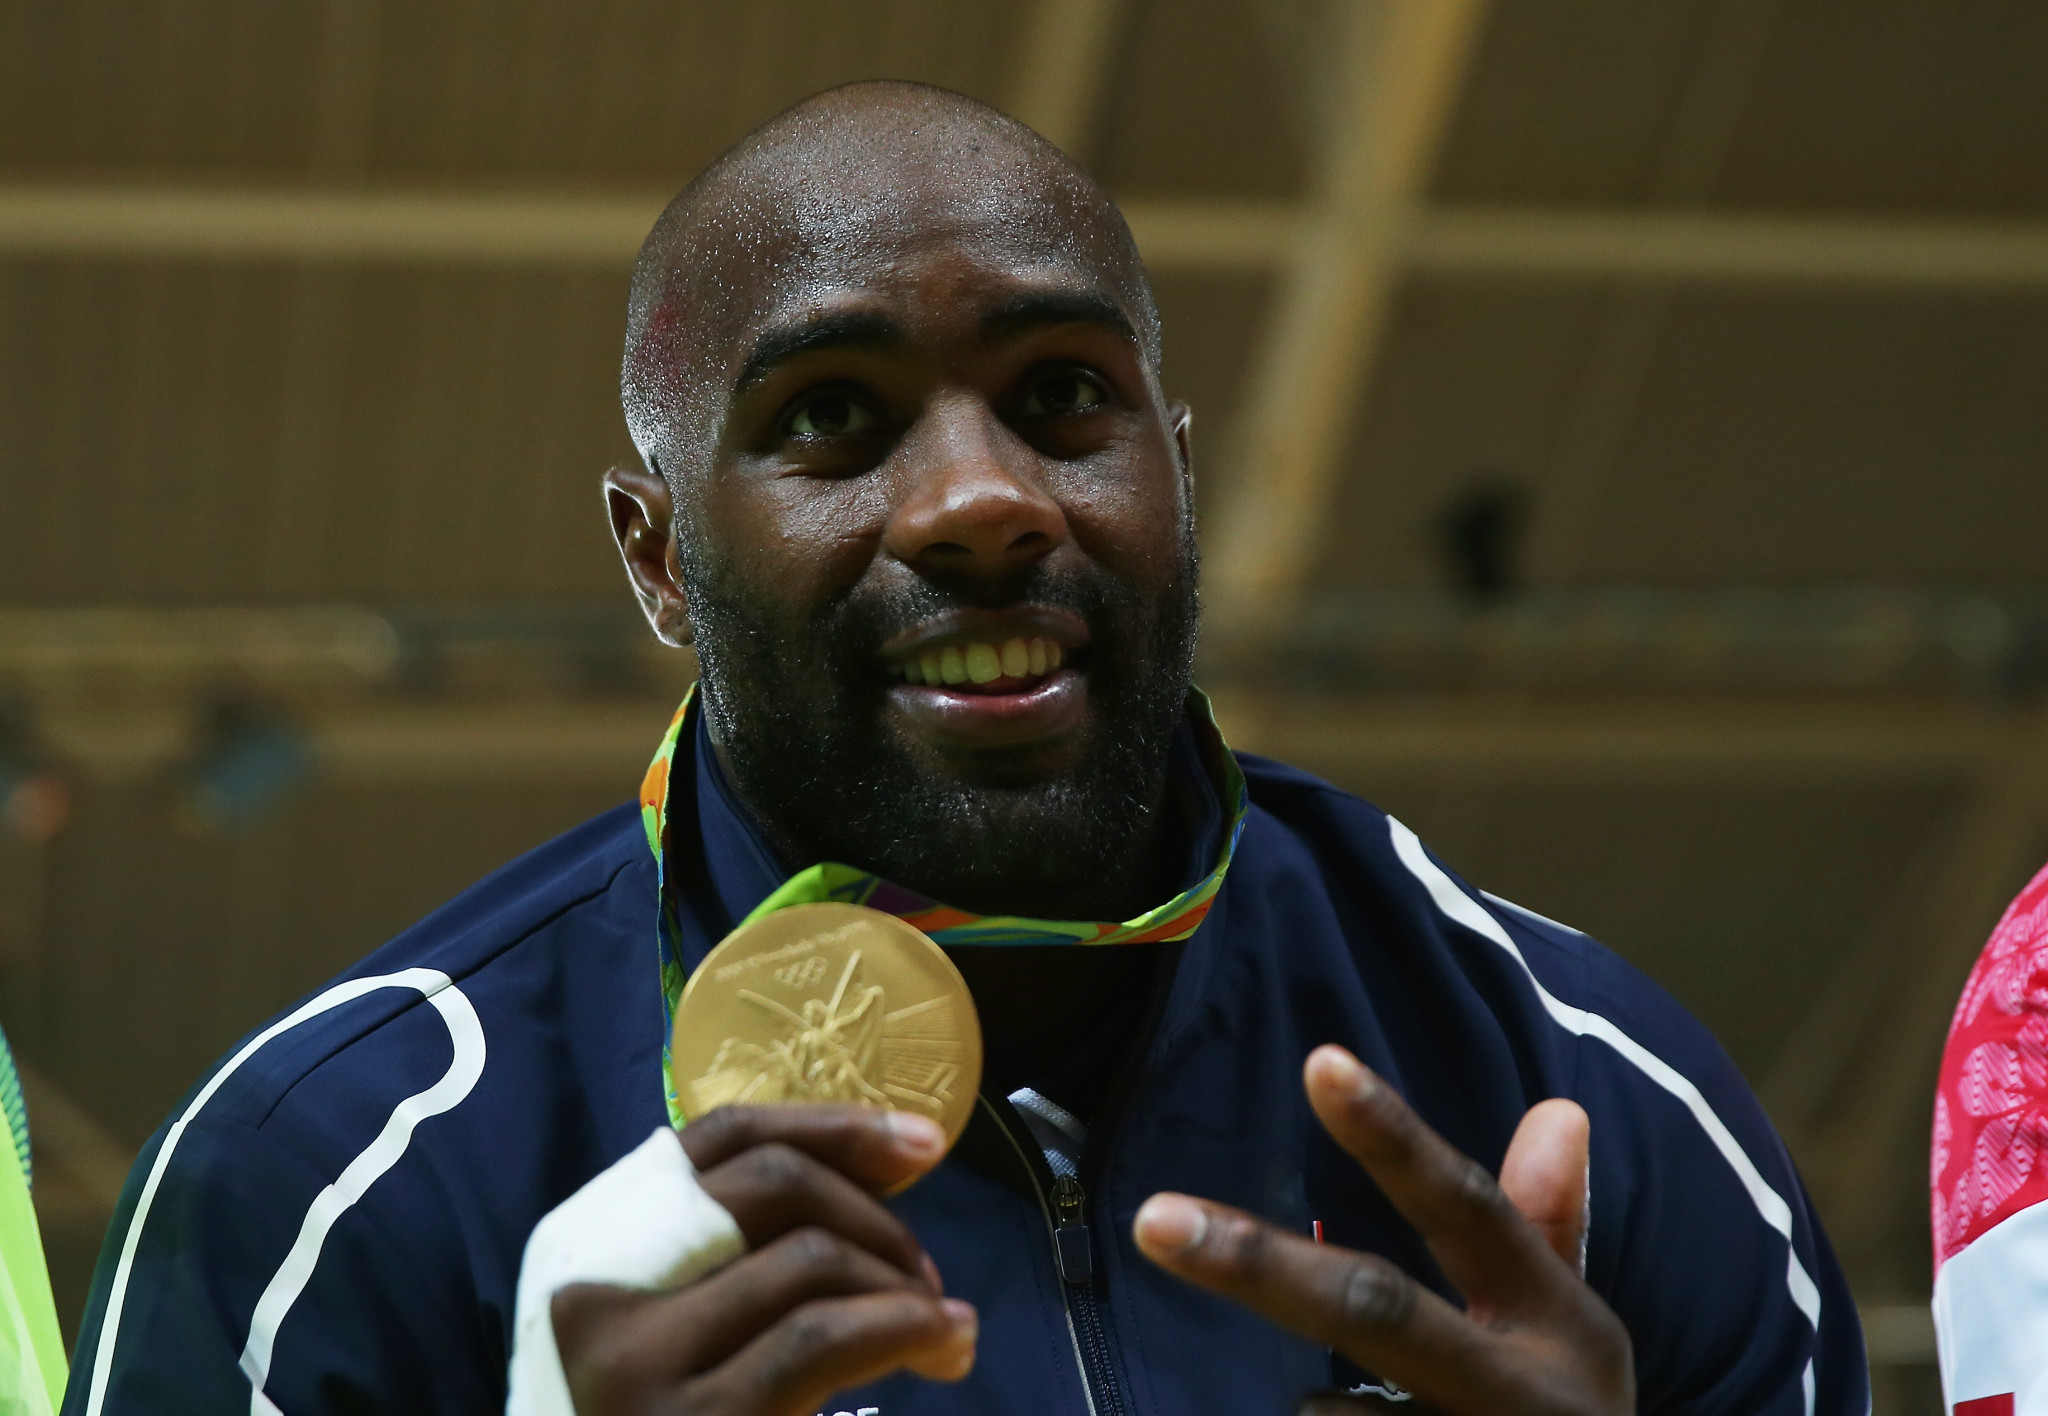 France's Teddy Riner defeated Japan's Hisayoshi Harasawa to claim the gold medal. GETTY IMAGES